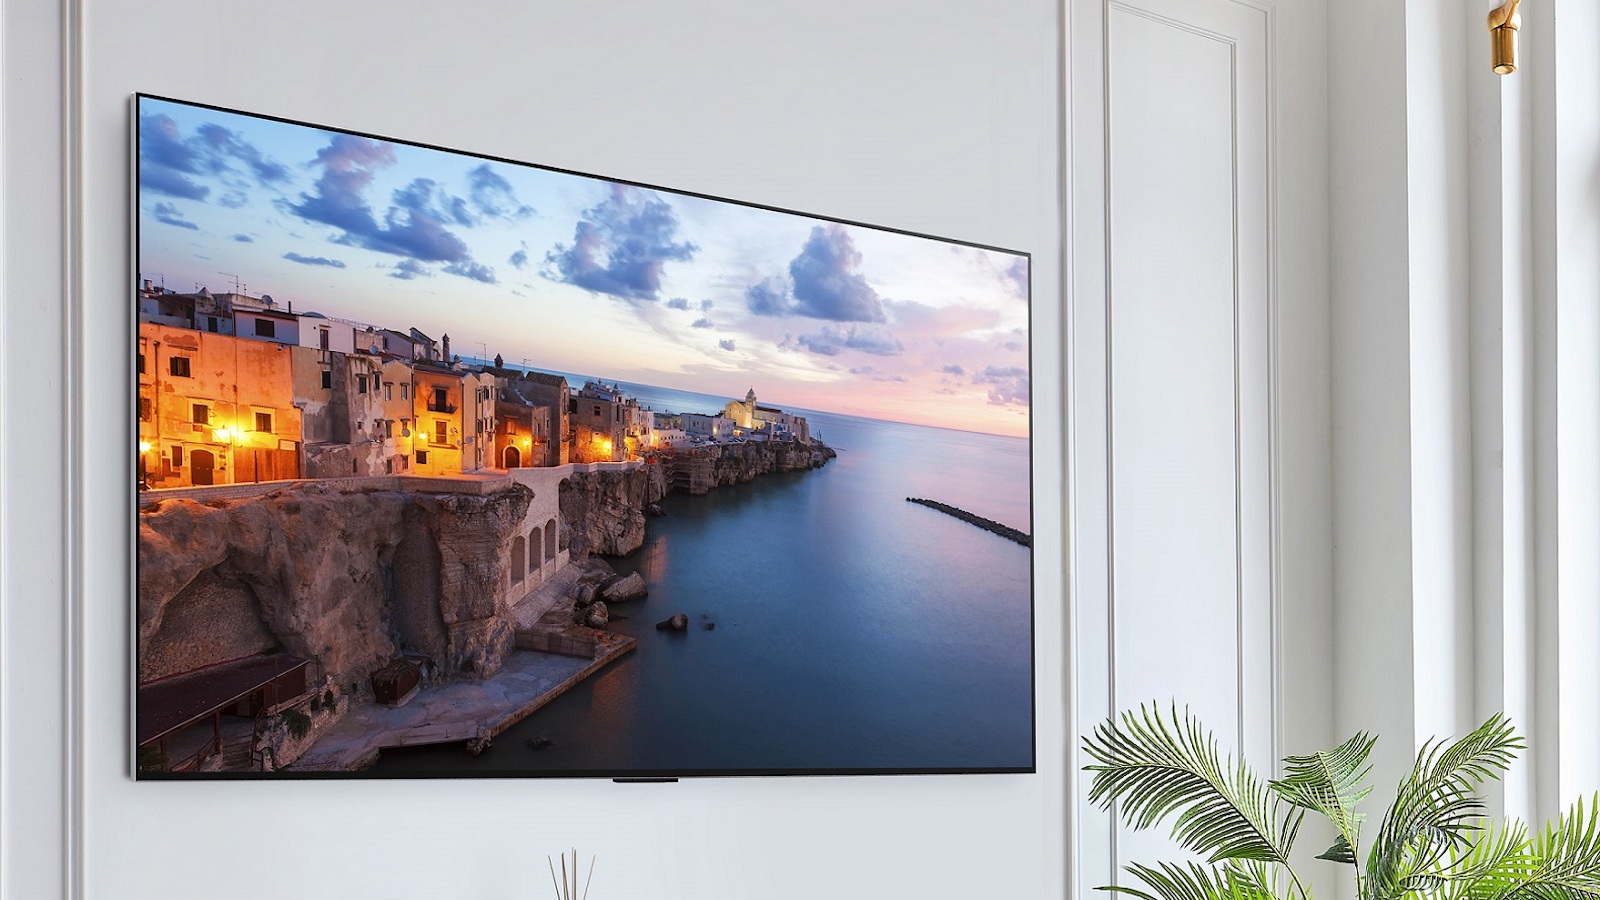 A wall-mounted TV displaying an urban landscape